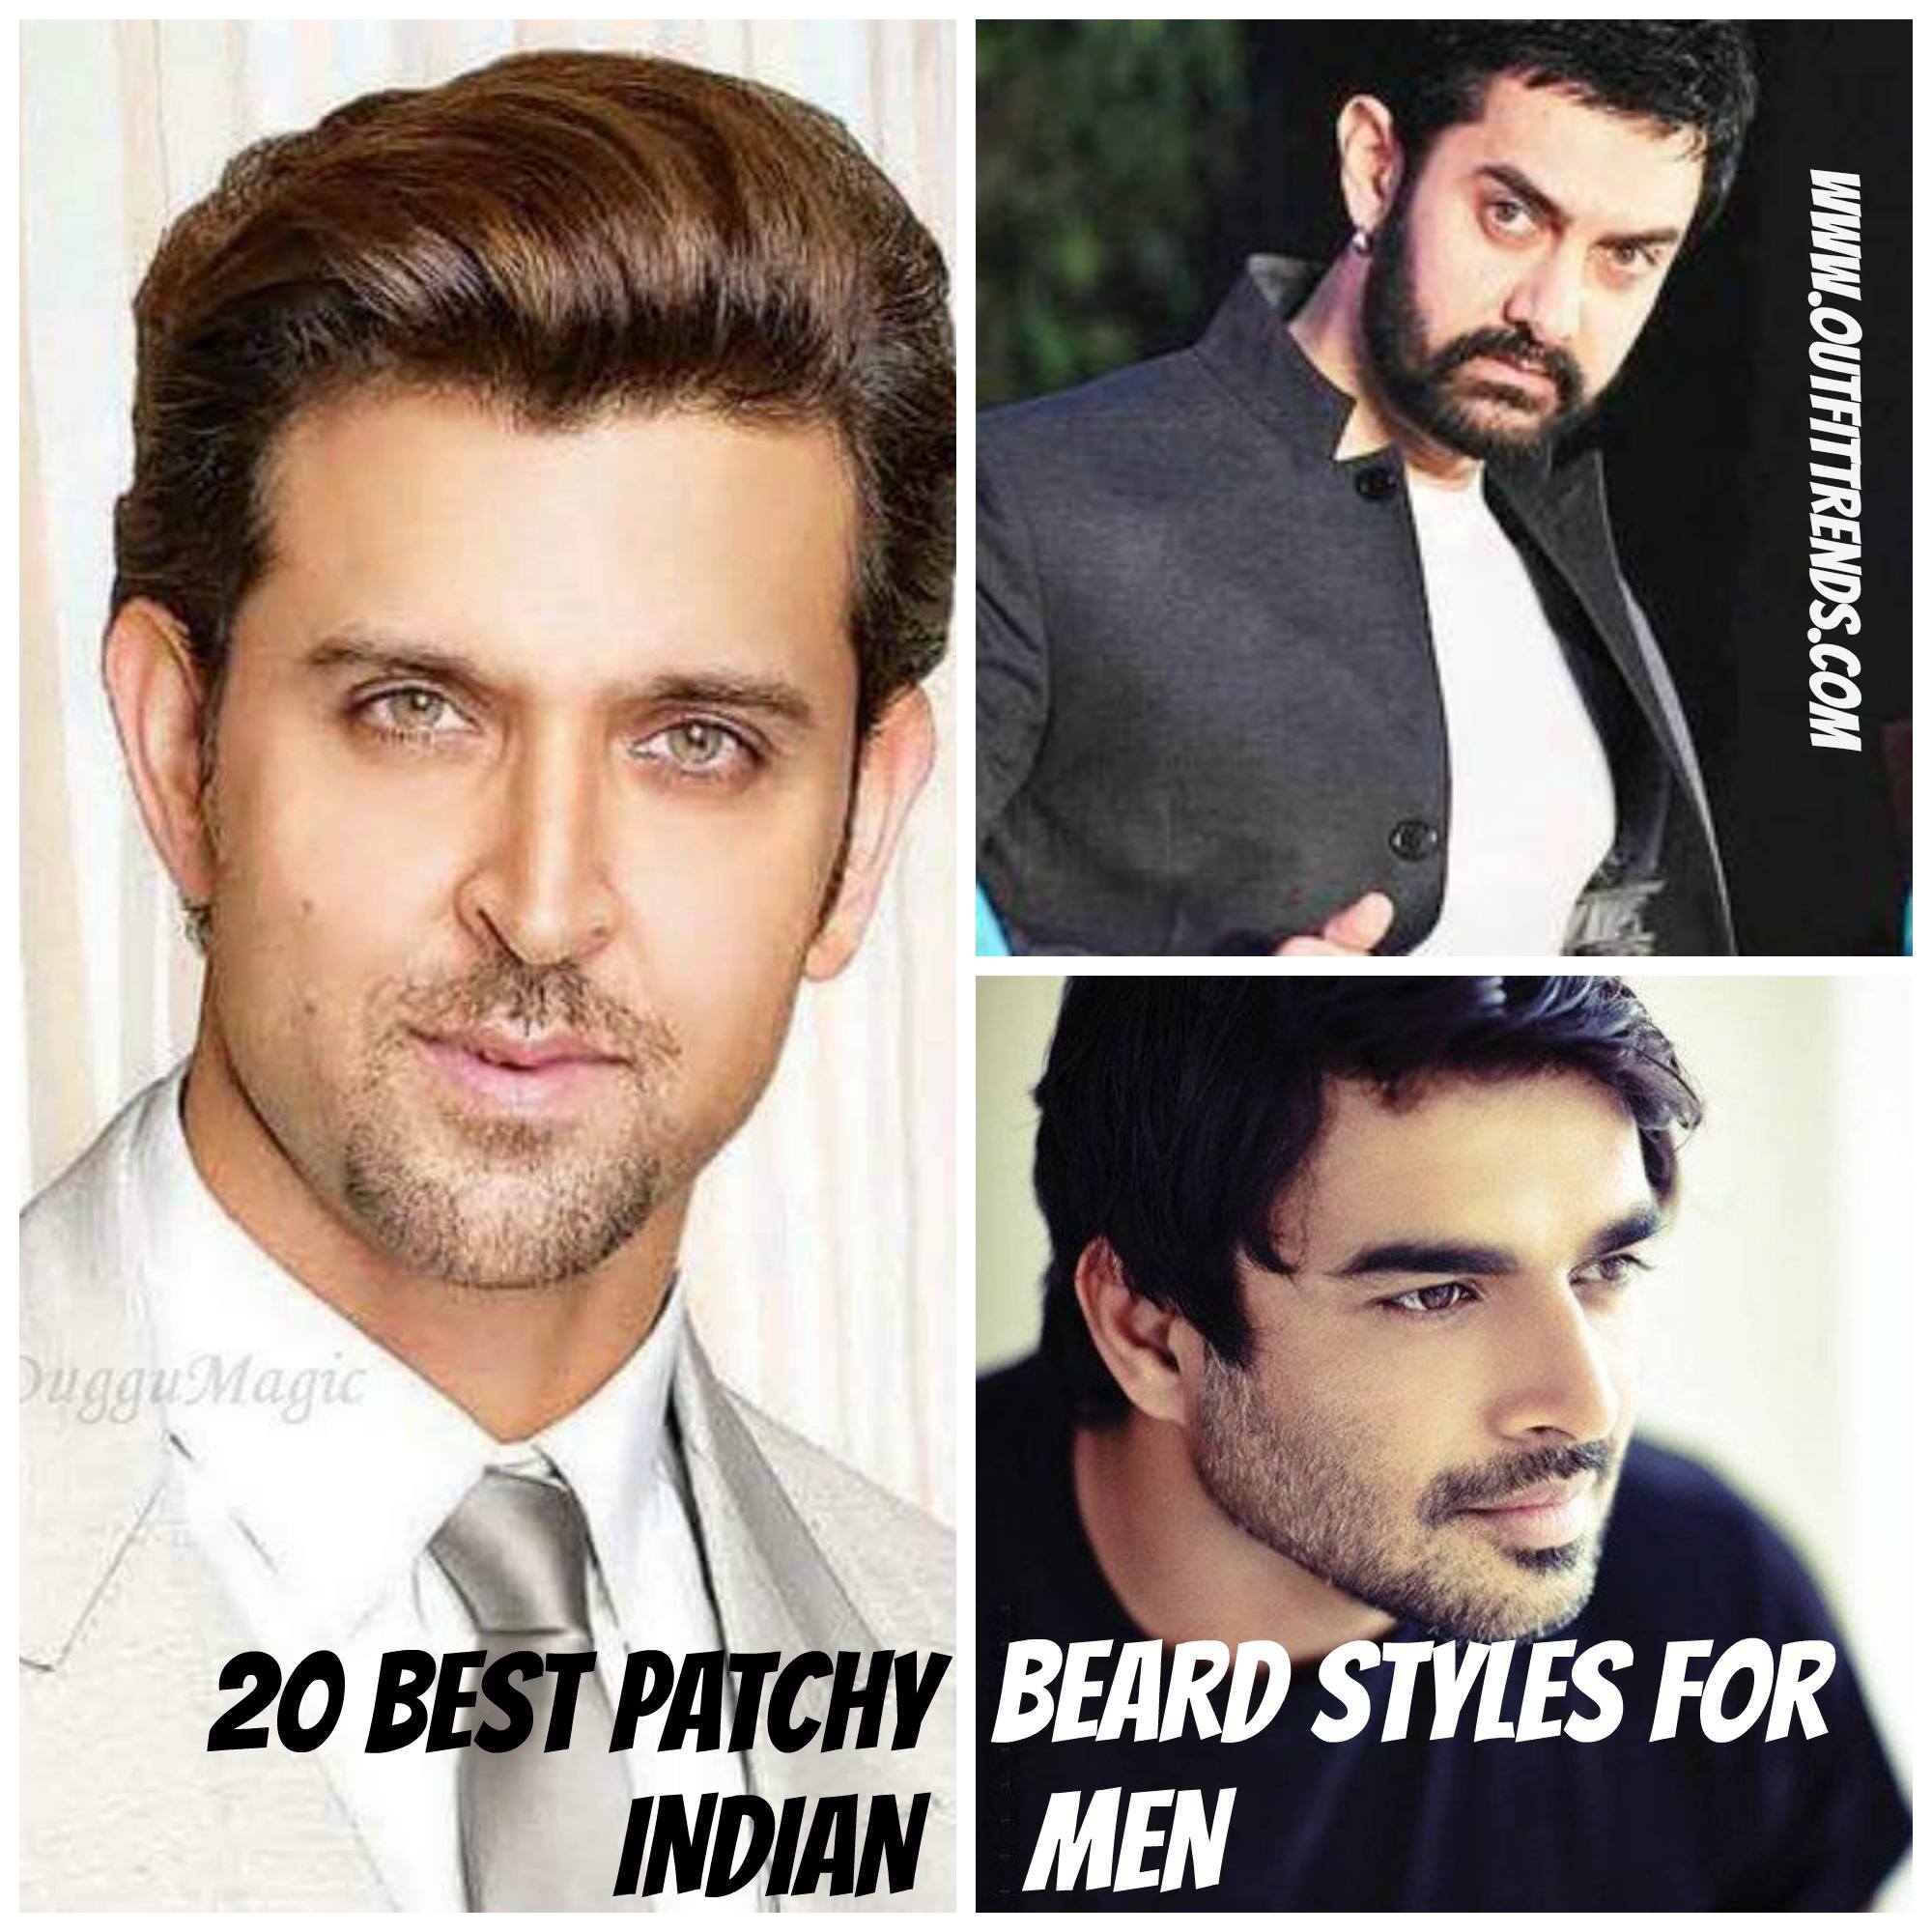 20 best patchy beard styles for indian men | tips and